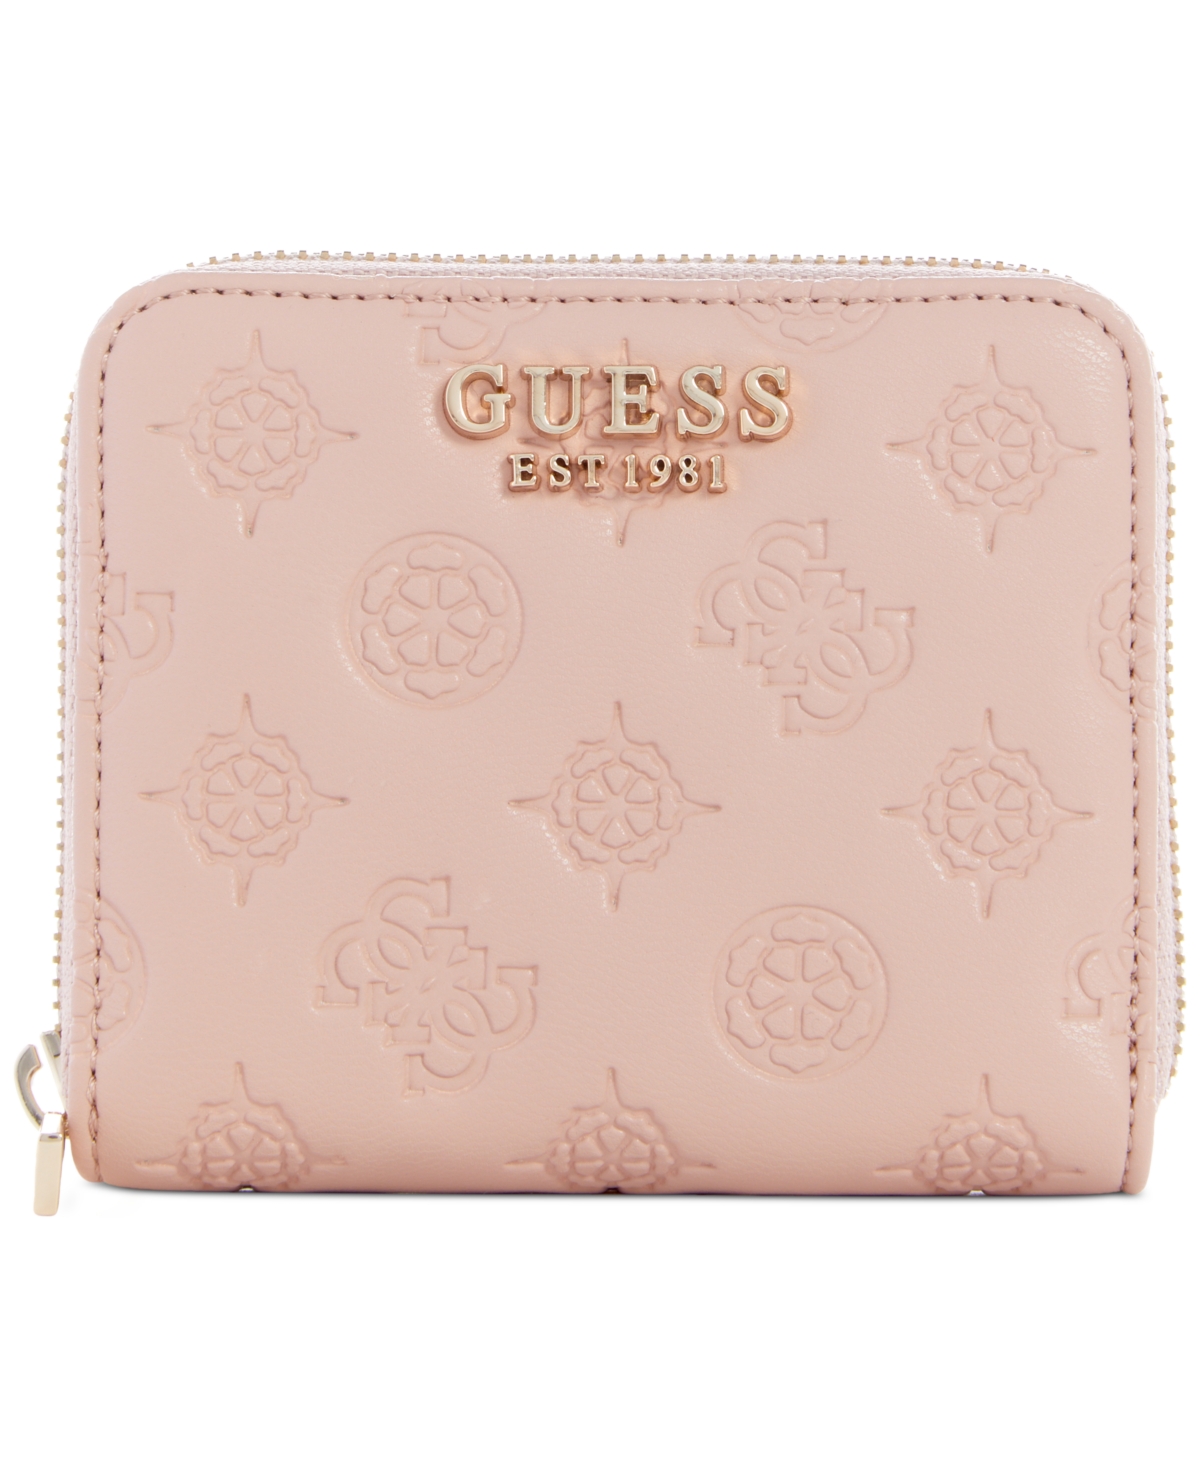 Guess La Femme Small Zip Around Wallet In Pale Rose